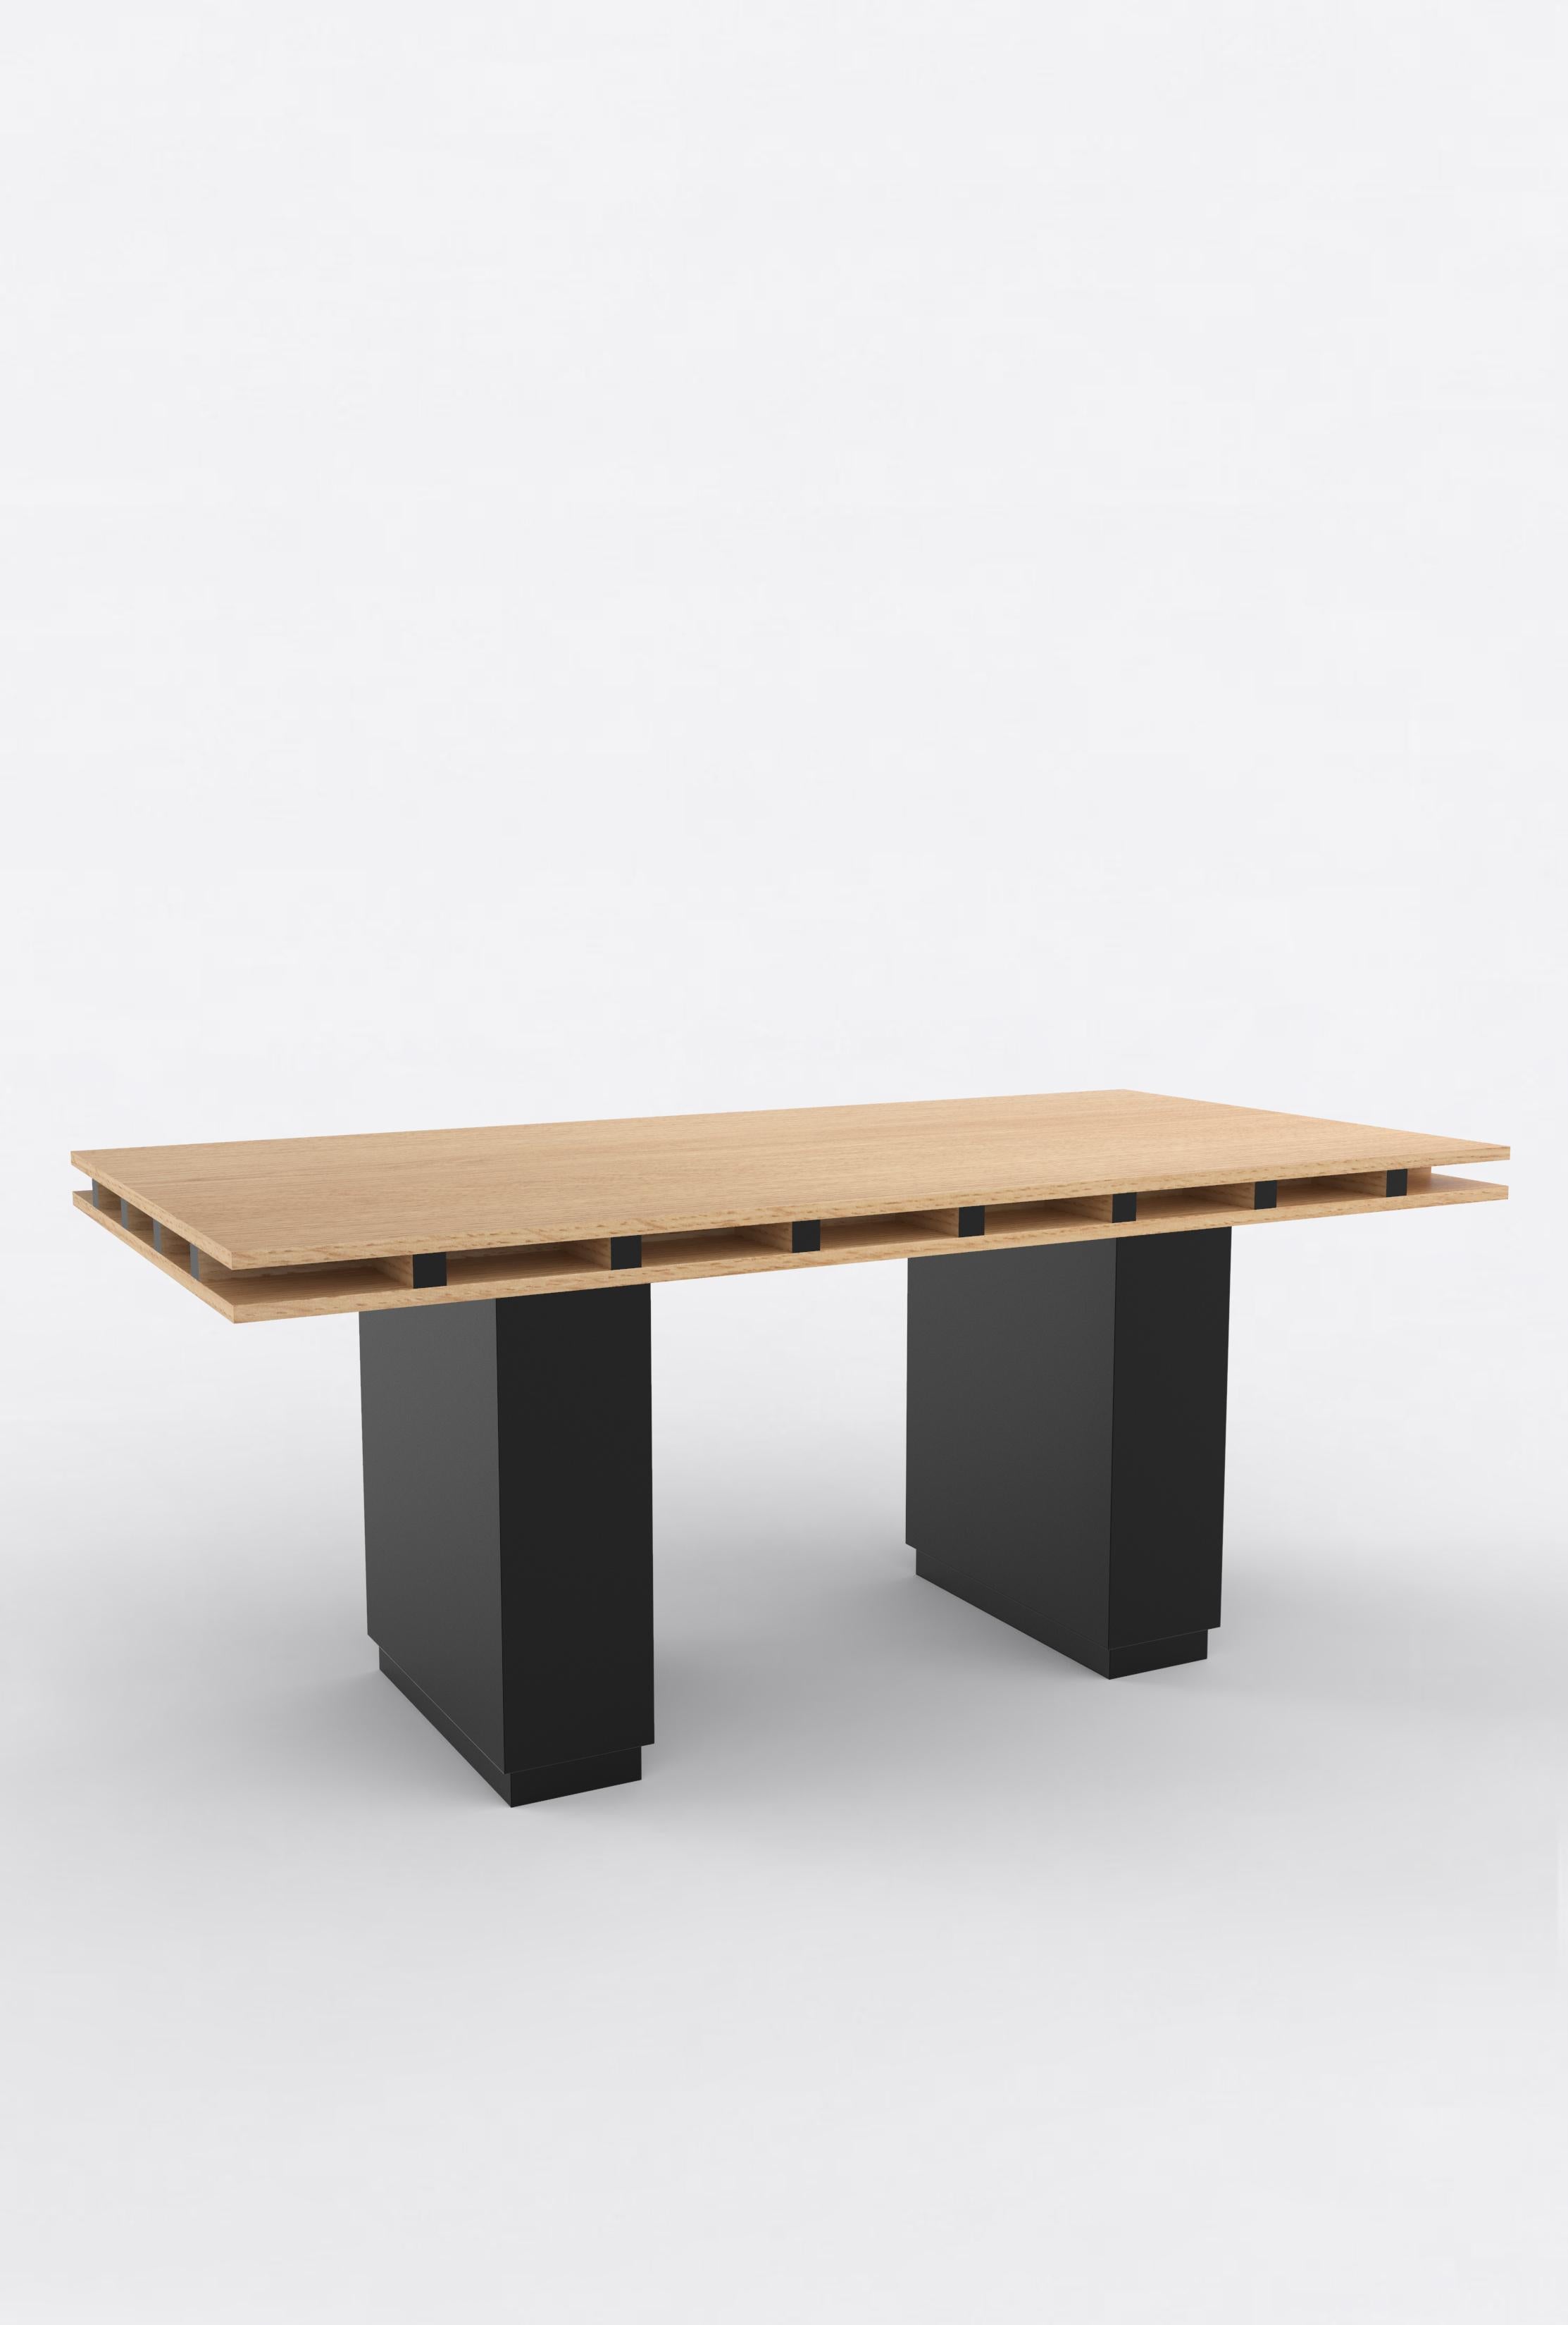 Orphan Work 103 Dining Table
Shown in oak and black
Available in natural oak with painted base and edges
Measures: 108” L x 36” W x 30” H
Dimensions available:
72” L x 36” W x 30” H
84” L x 36” W x 30” H
96” L x 36” W x 30” H
108” L x 42” W x 30”